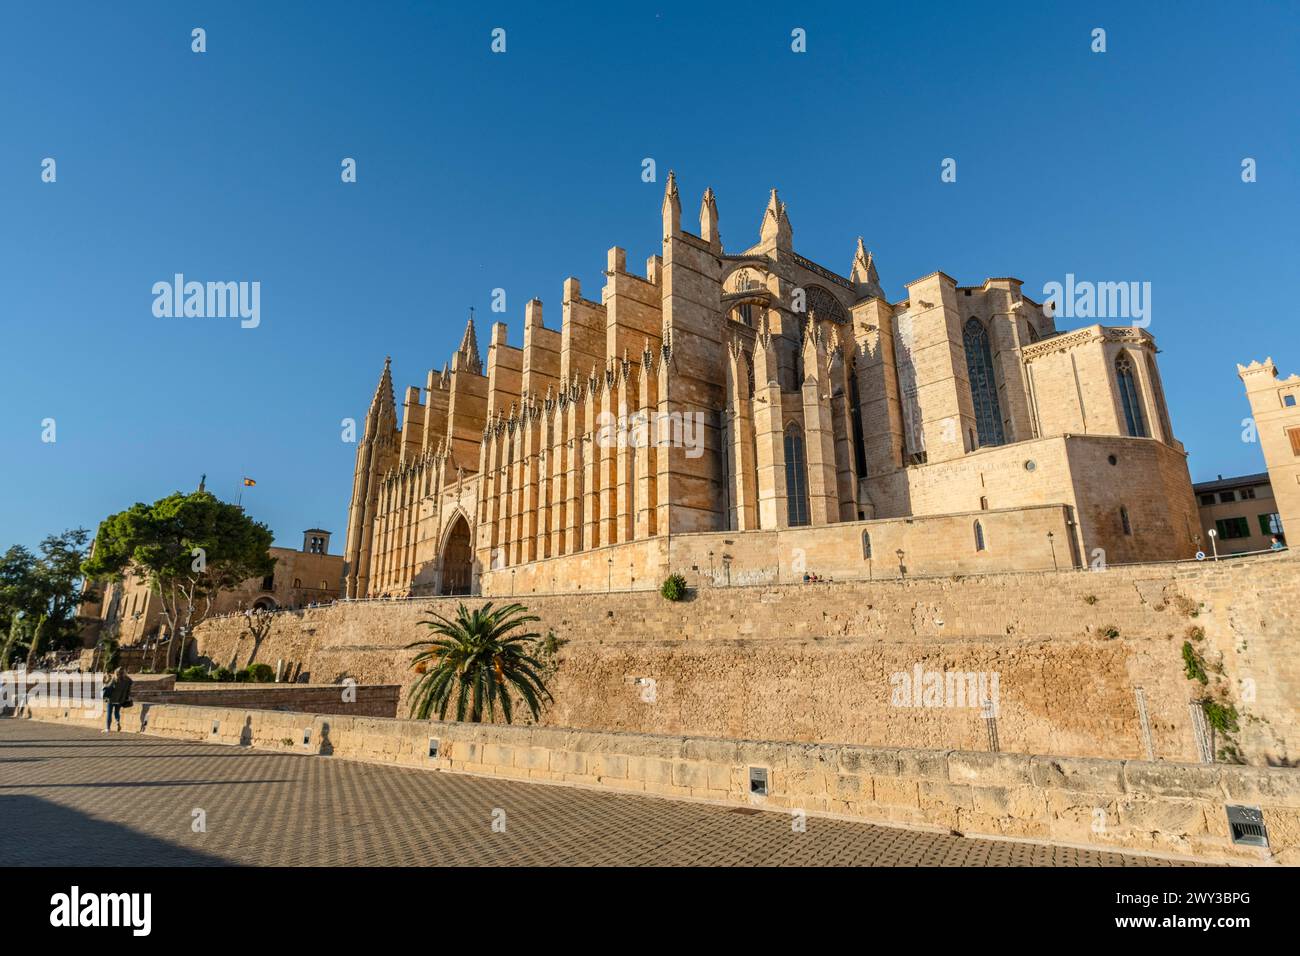 Beautiful view of cathedral in Palma de Mallorca, Spain Stock Photo